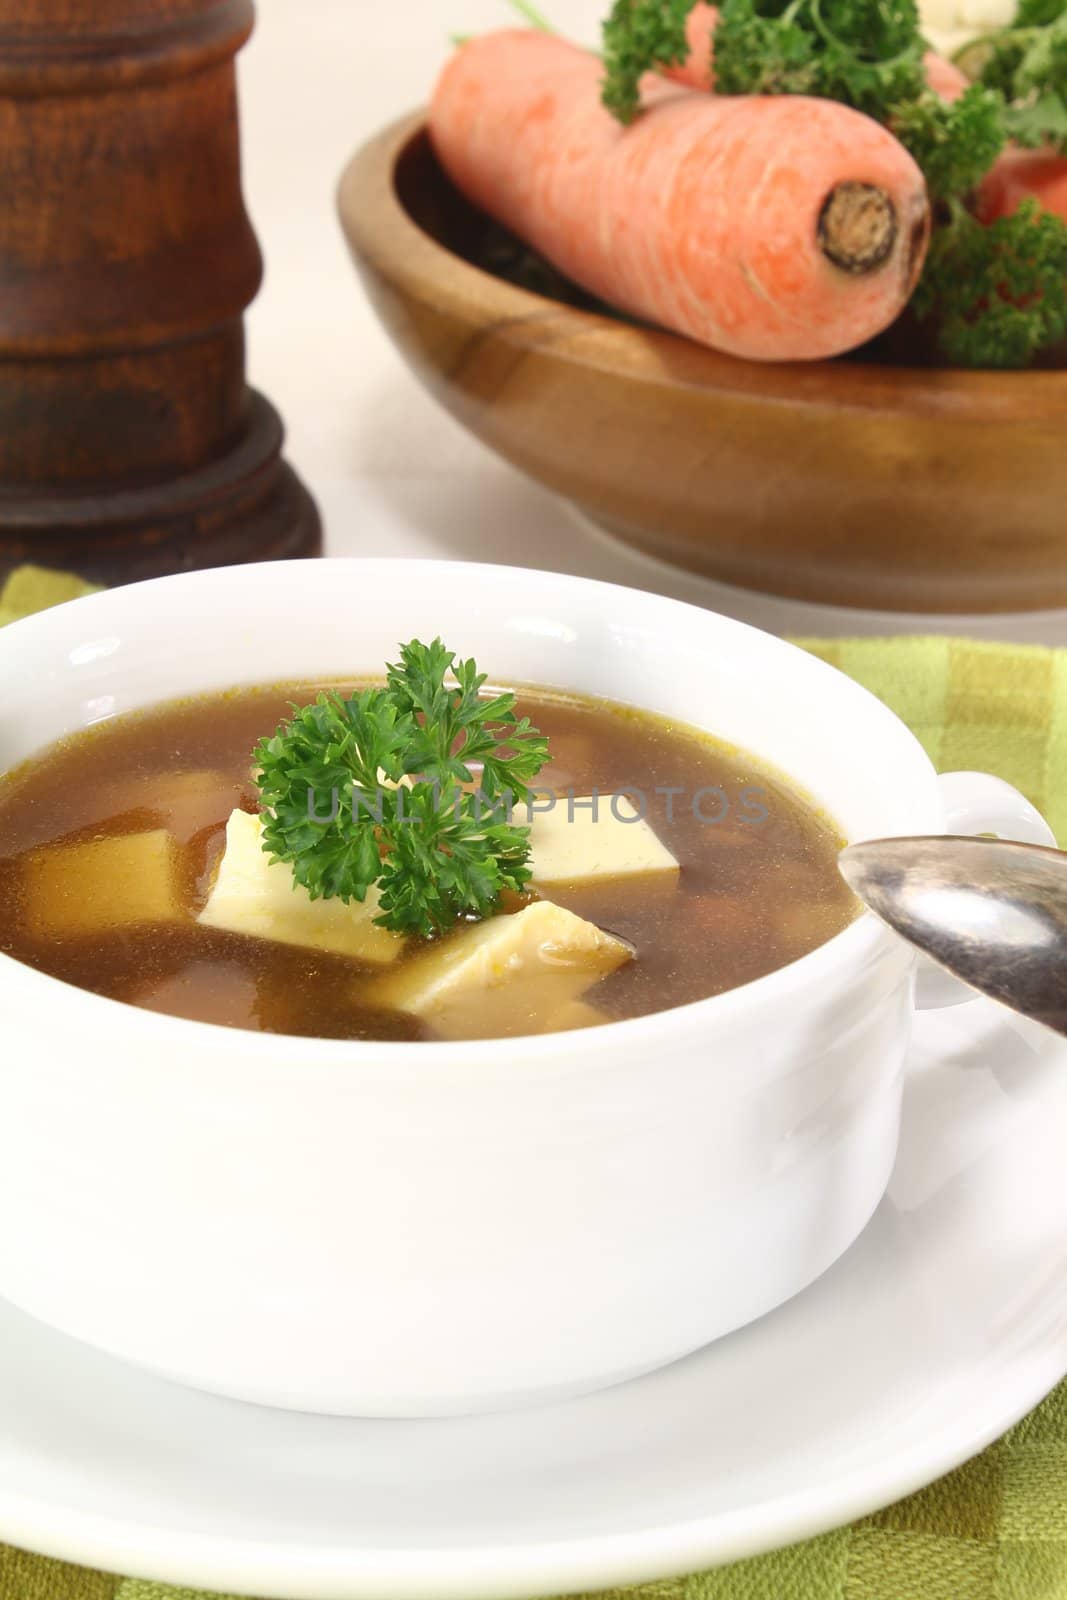 Beef consomme with greens by discovery